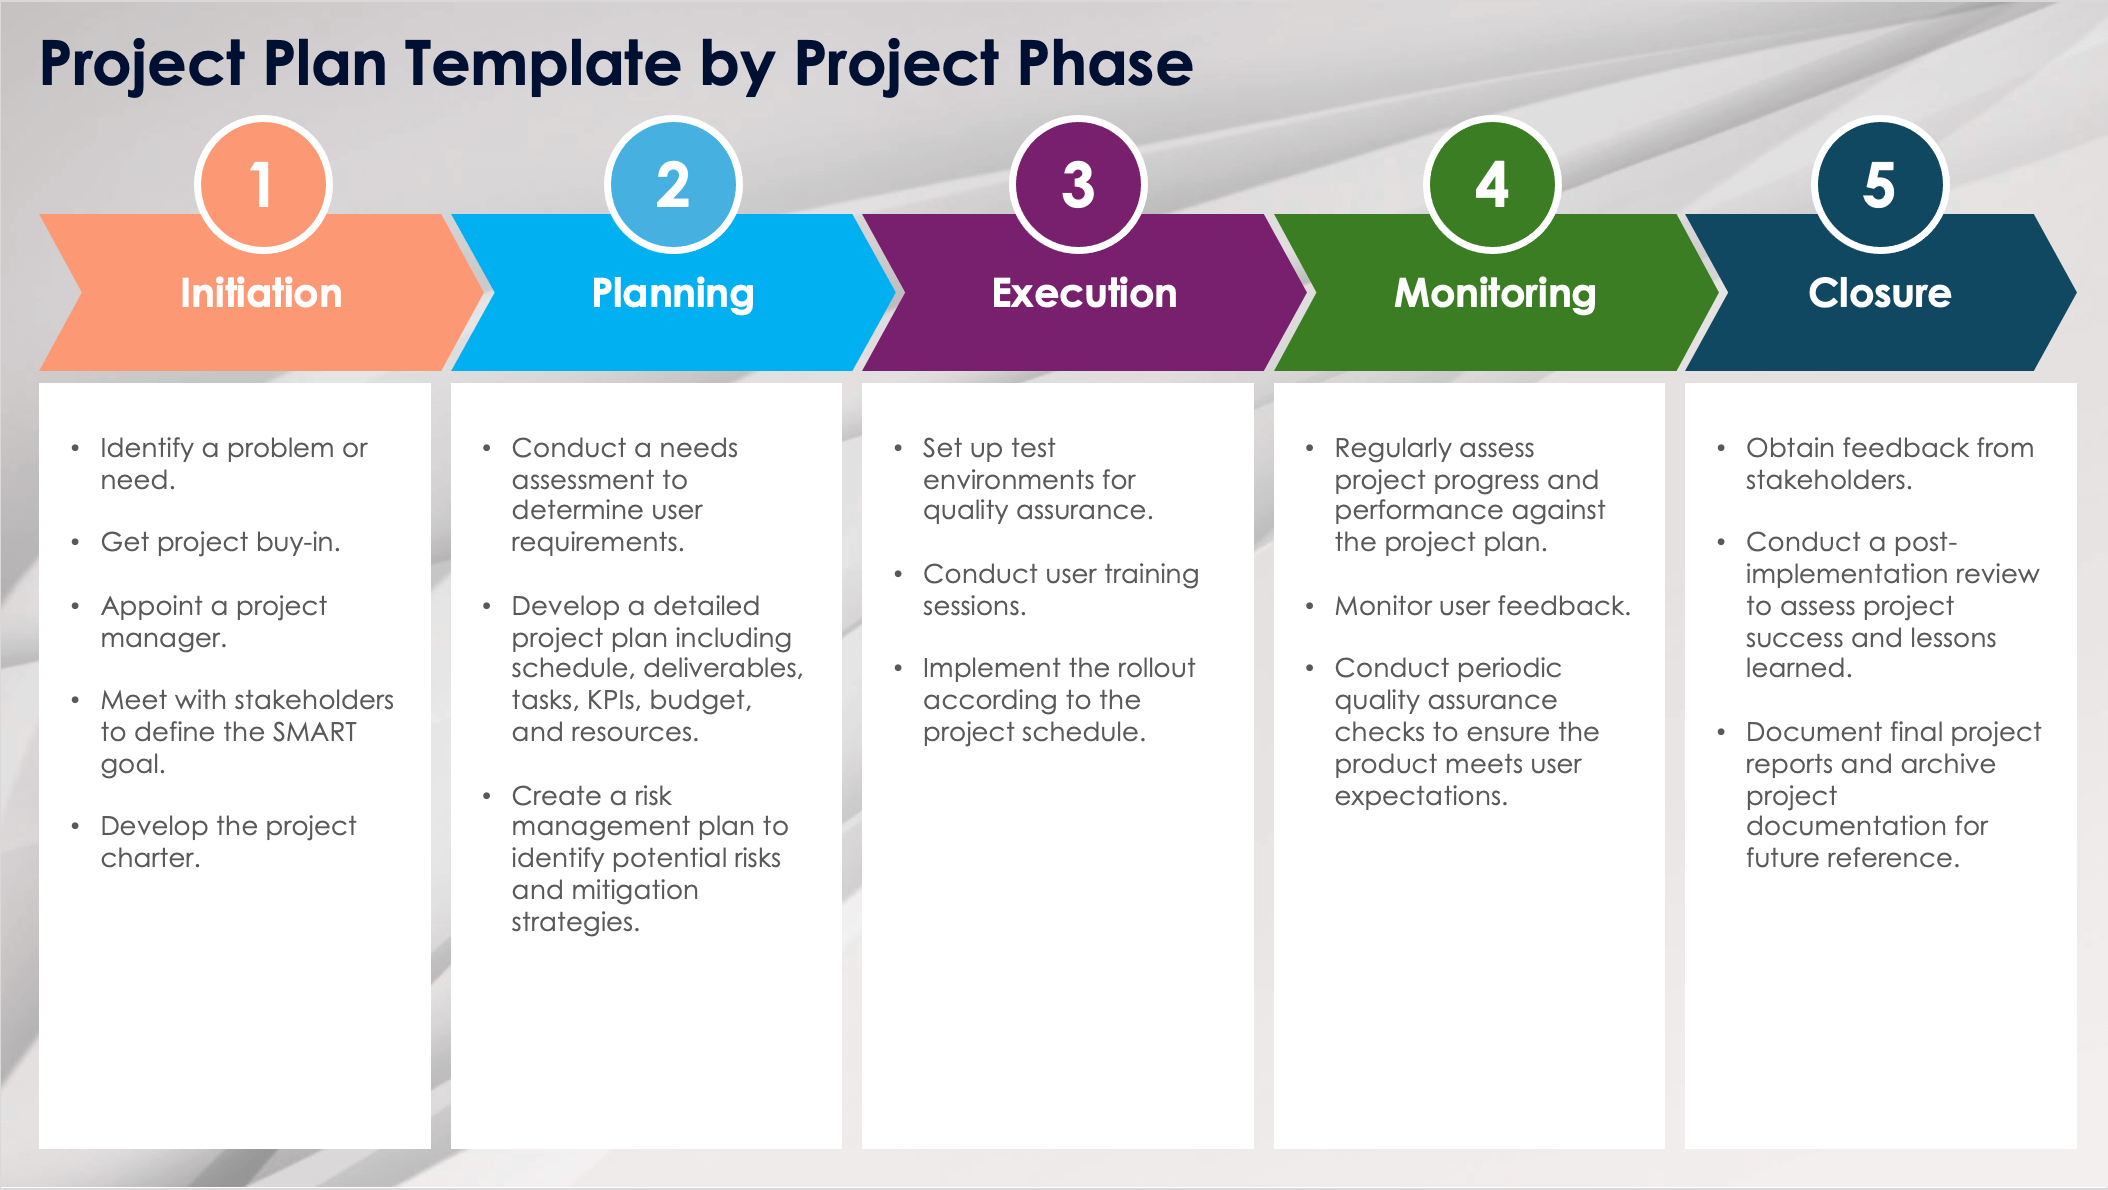 Project Plan Template by Project Phase